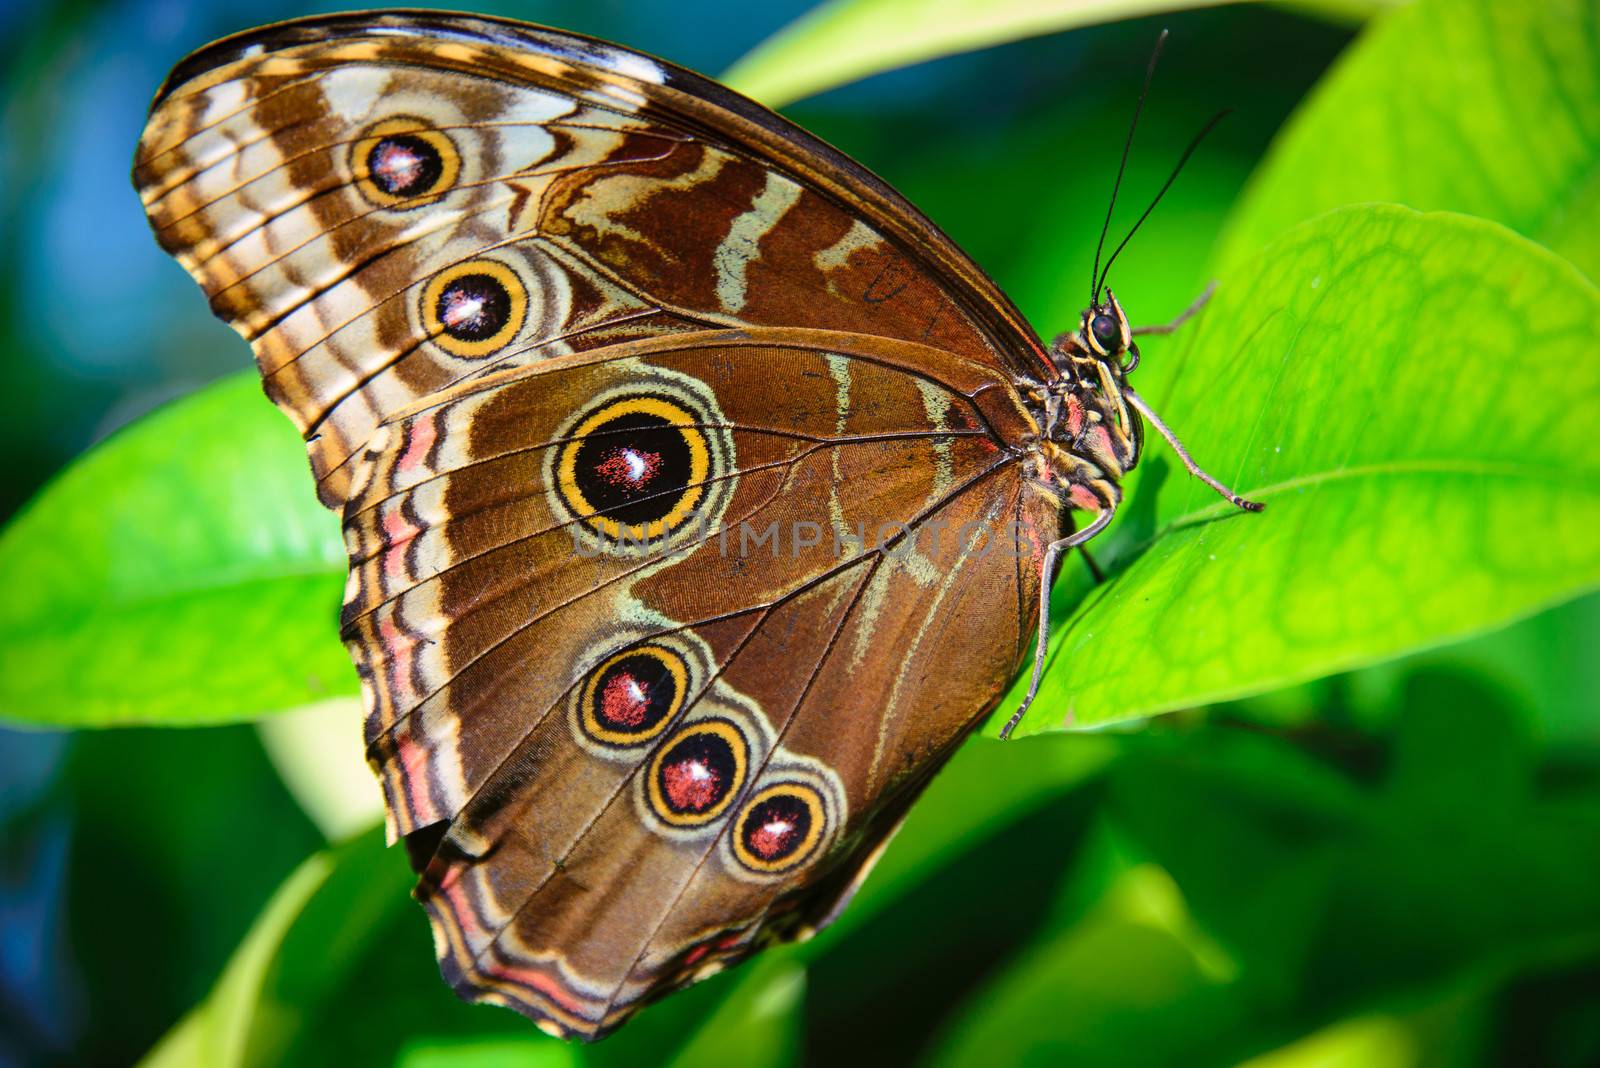 Close-up of a Brown butterfly on a leaf, Key West, Monroe County, Florida, USA